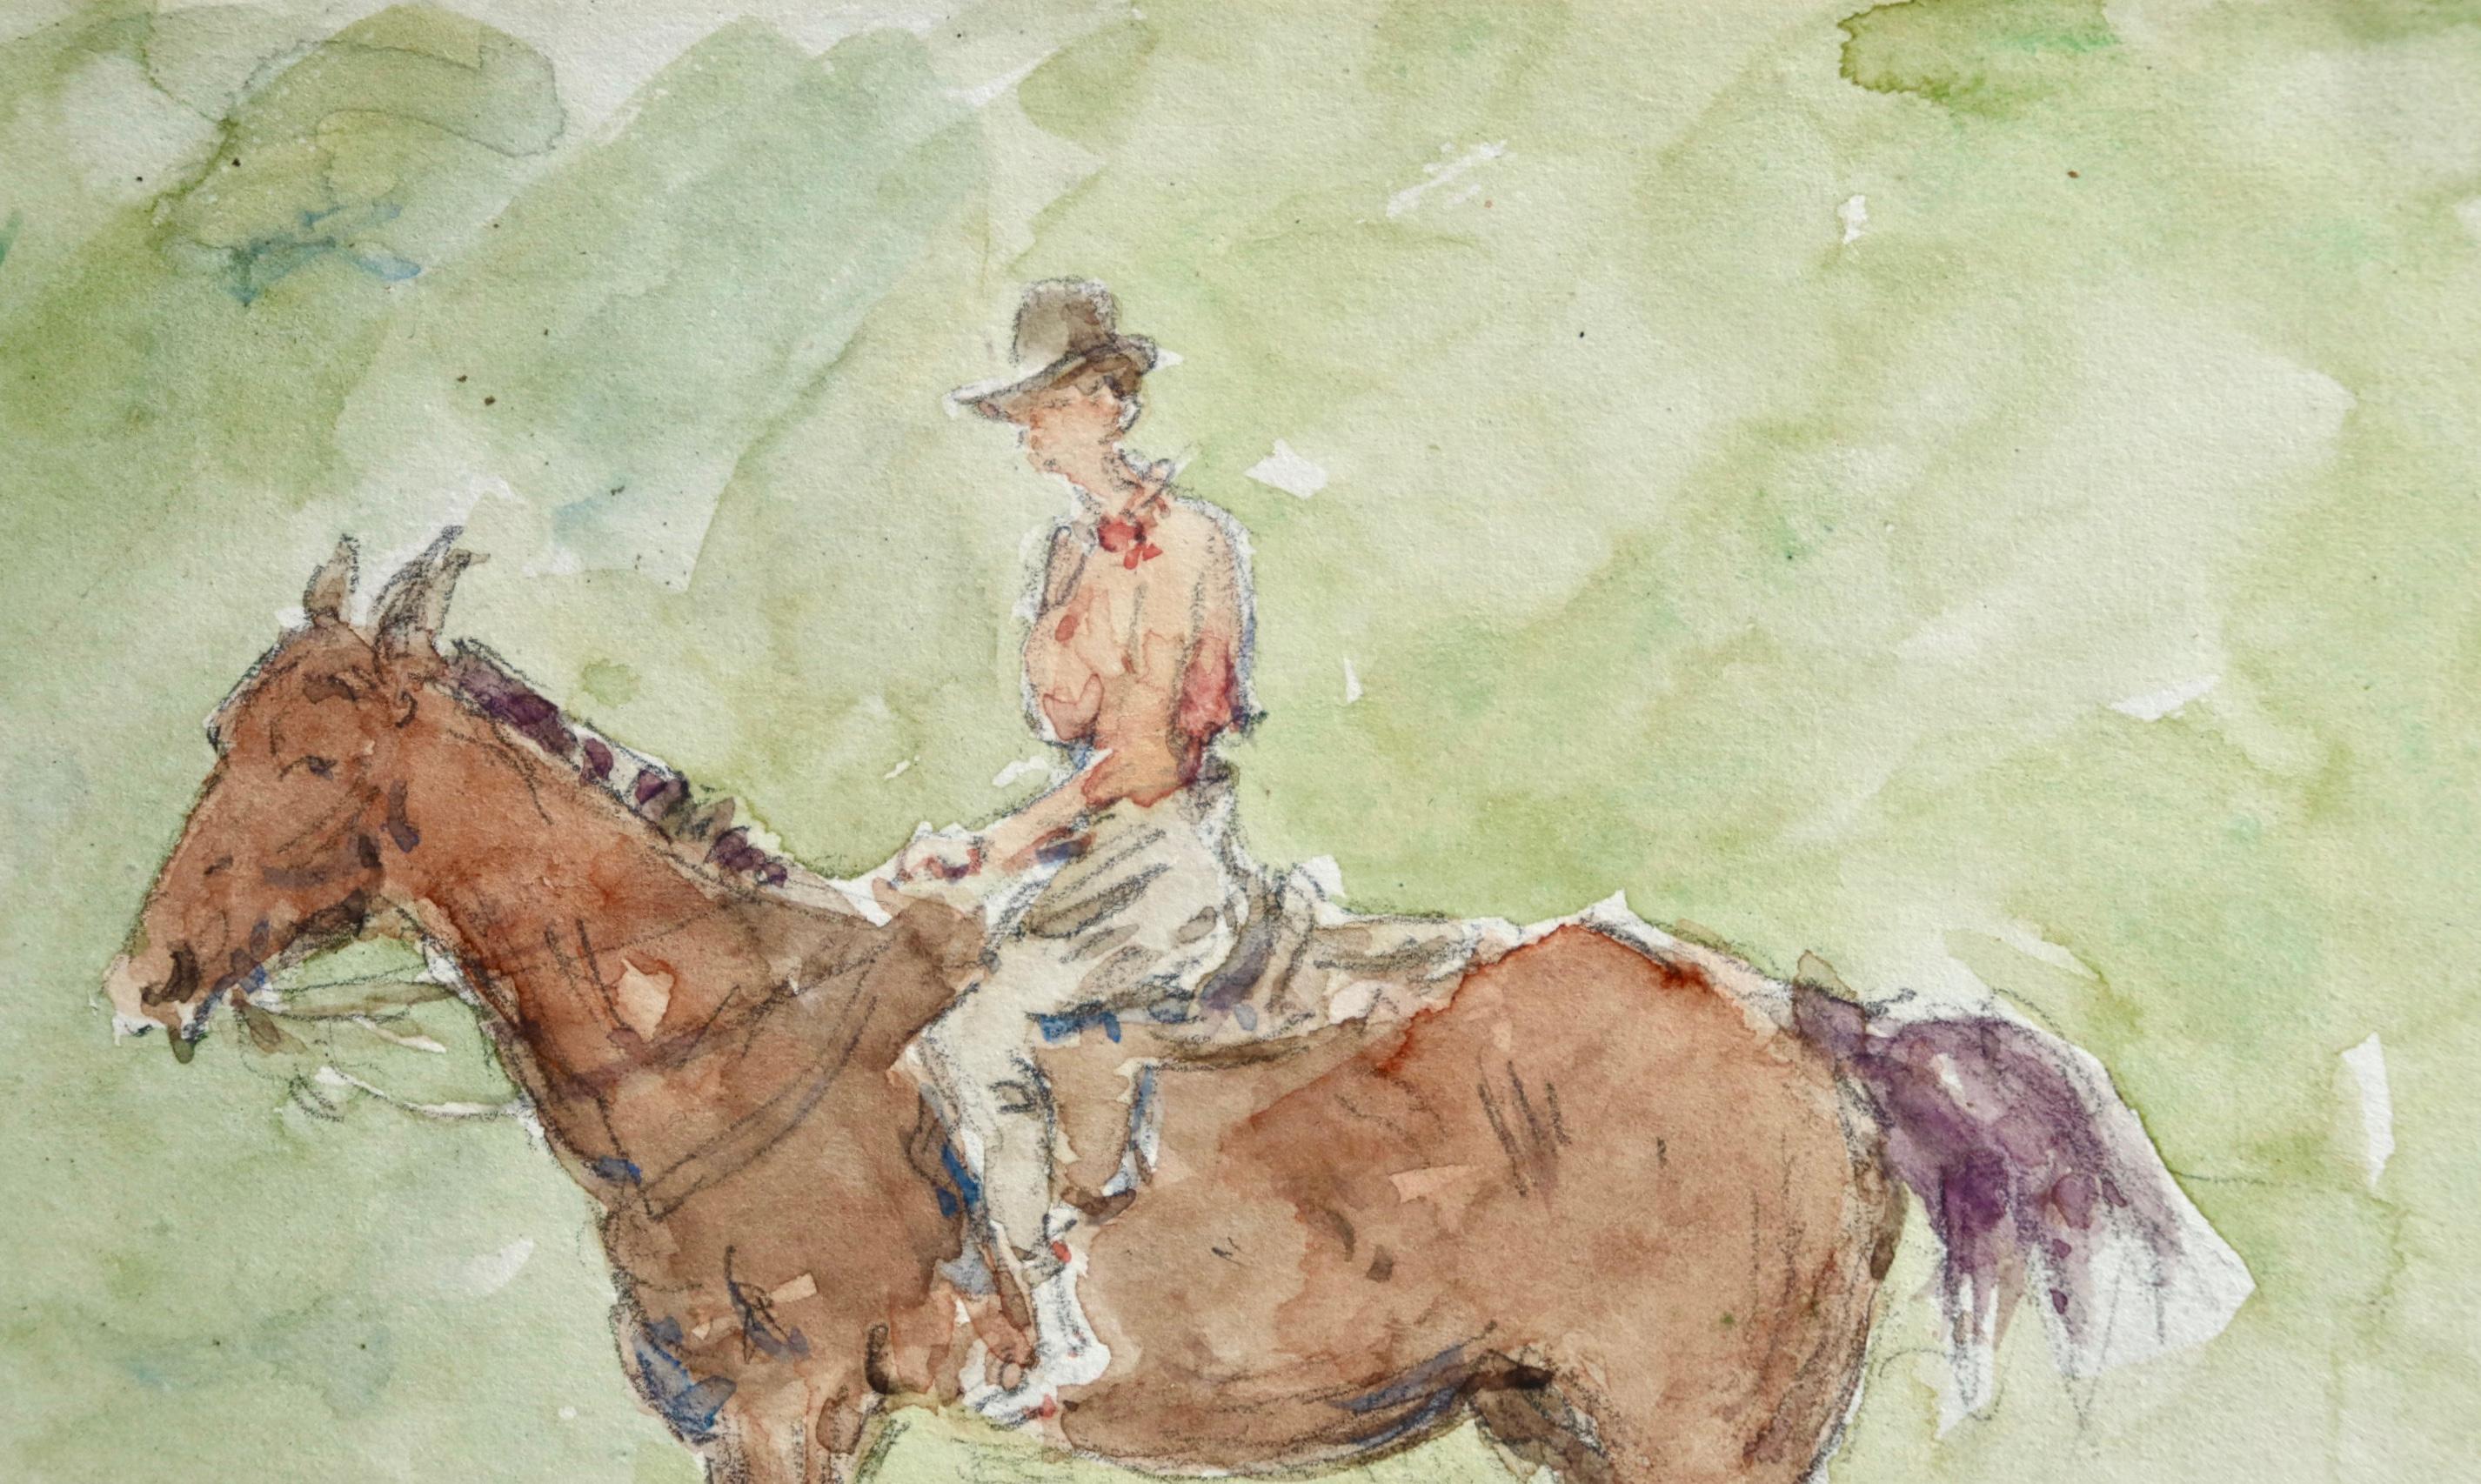 Watercolour on paper circa 1912 by Henri Duhem depicting the artist's adopted daughter, Nelly Sergeant Duhem on horseback. Signed lower left and titled 